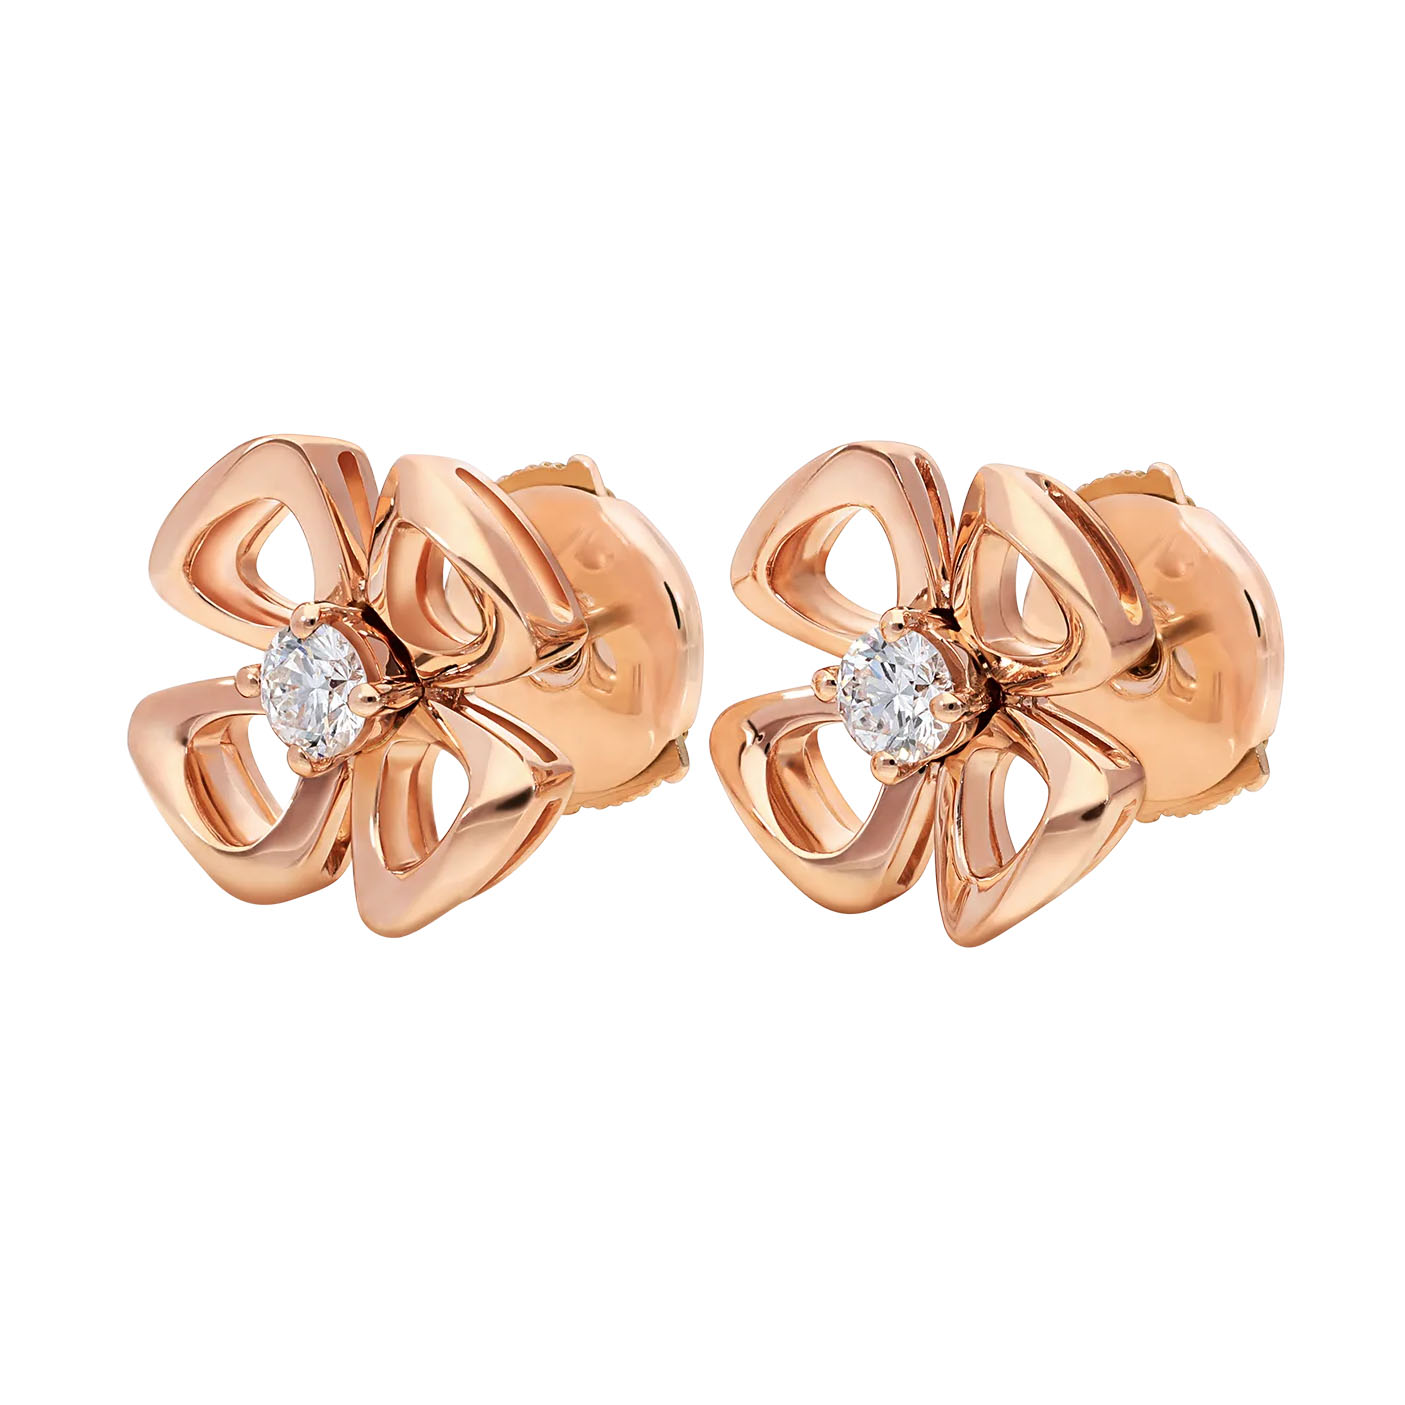 Wholesale Custom design 18k rose gold OEM/ODM Jewelry earrings, set with two central diamonds OEM jewelry service